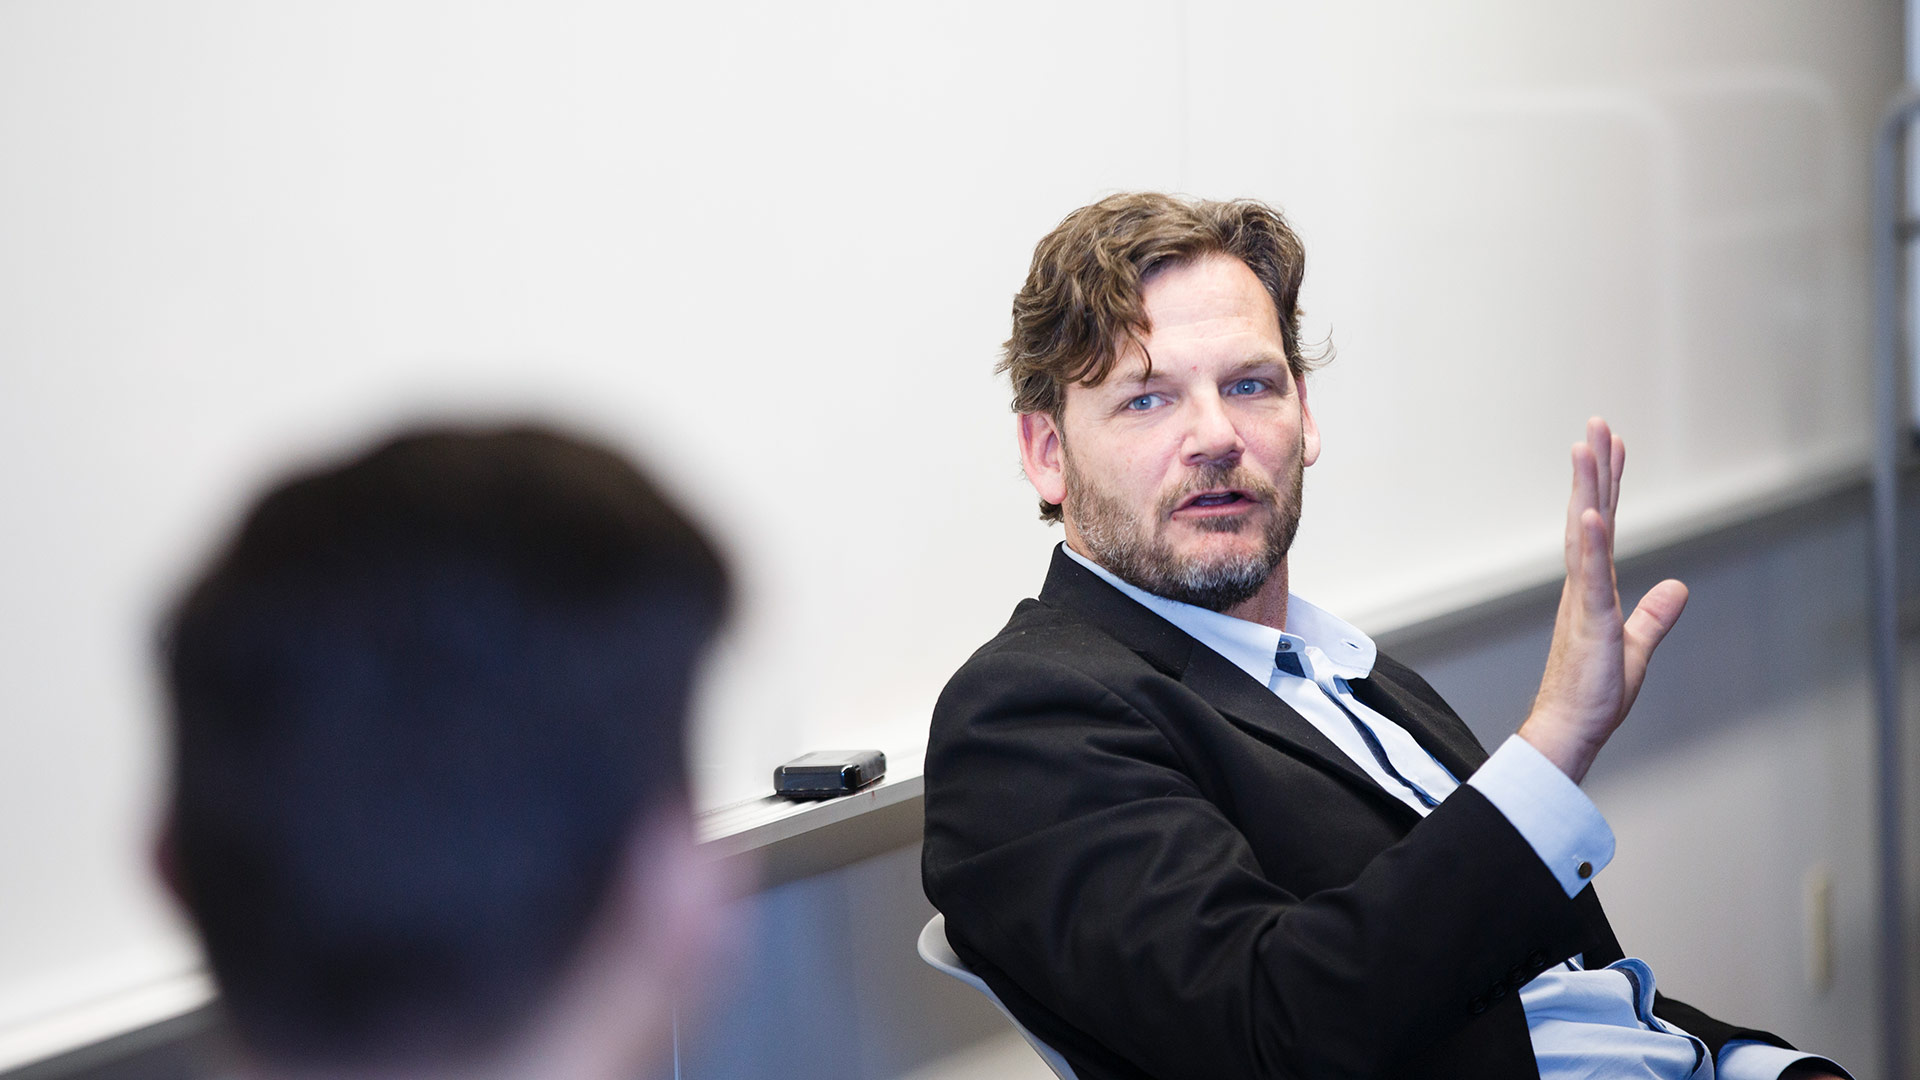 Professor Alec Johnson gives feedback during student presentations during a Foundations of Entrepreneurship class in a "smart classroom" in Schulze Hall 420 in downtown Minneapolis on April 14, 2015.